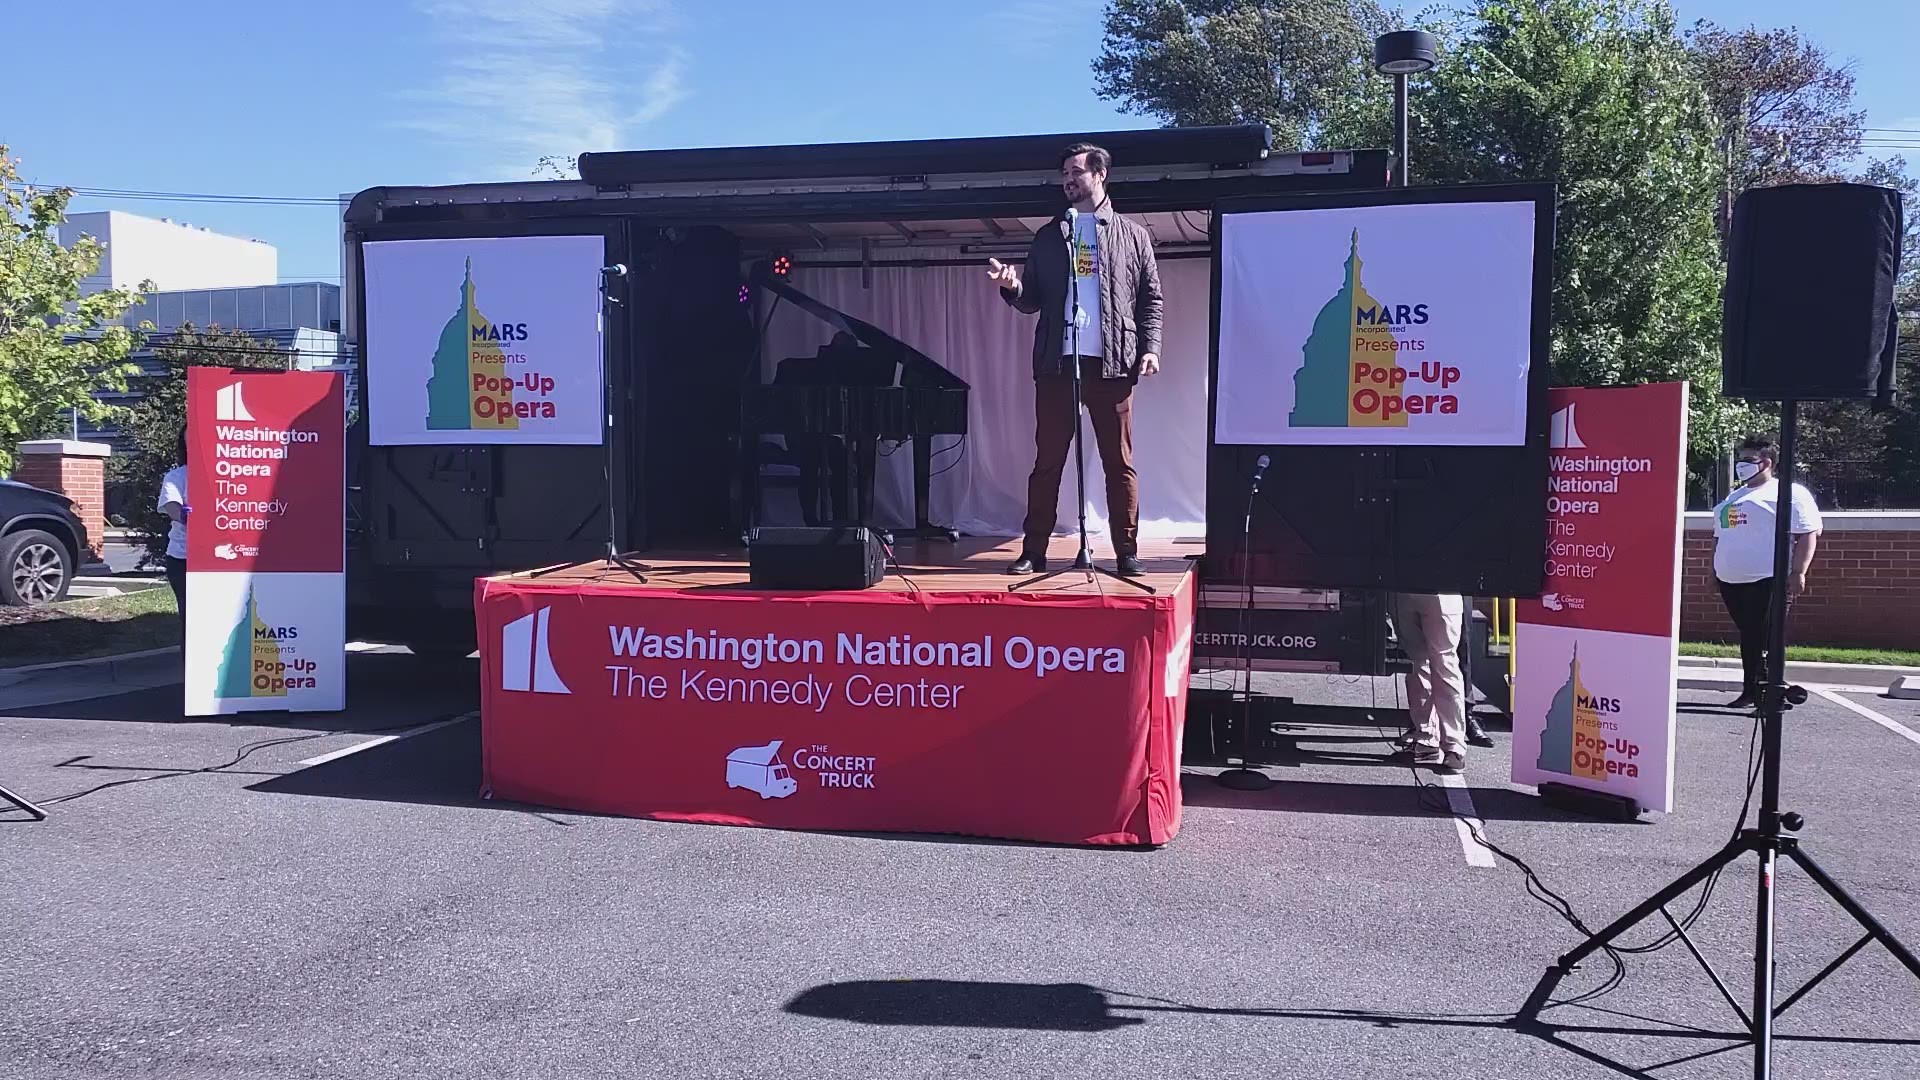 The Washington National Opera is performing in a moving truck during the pandemic.